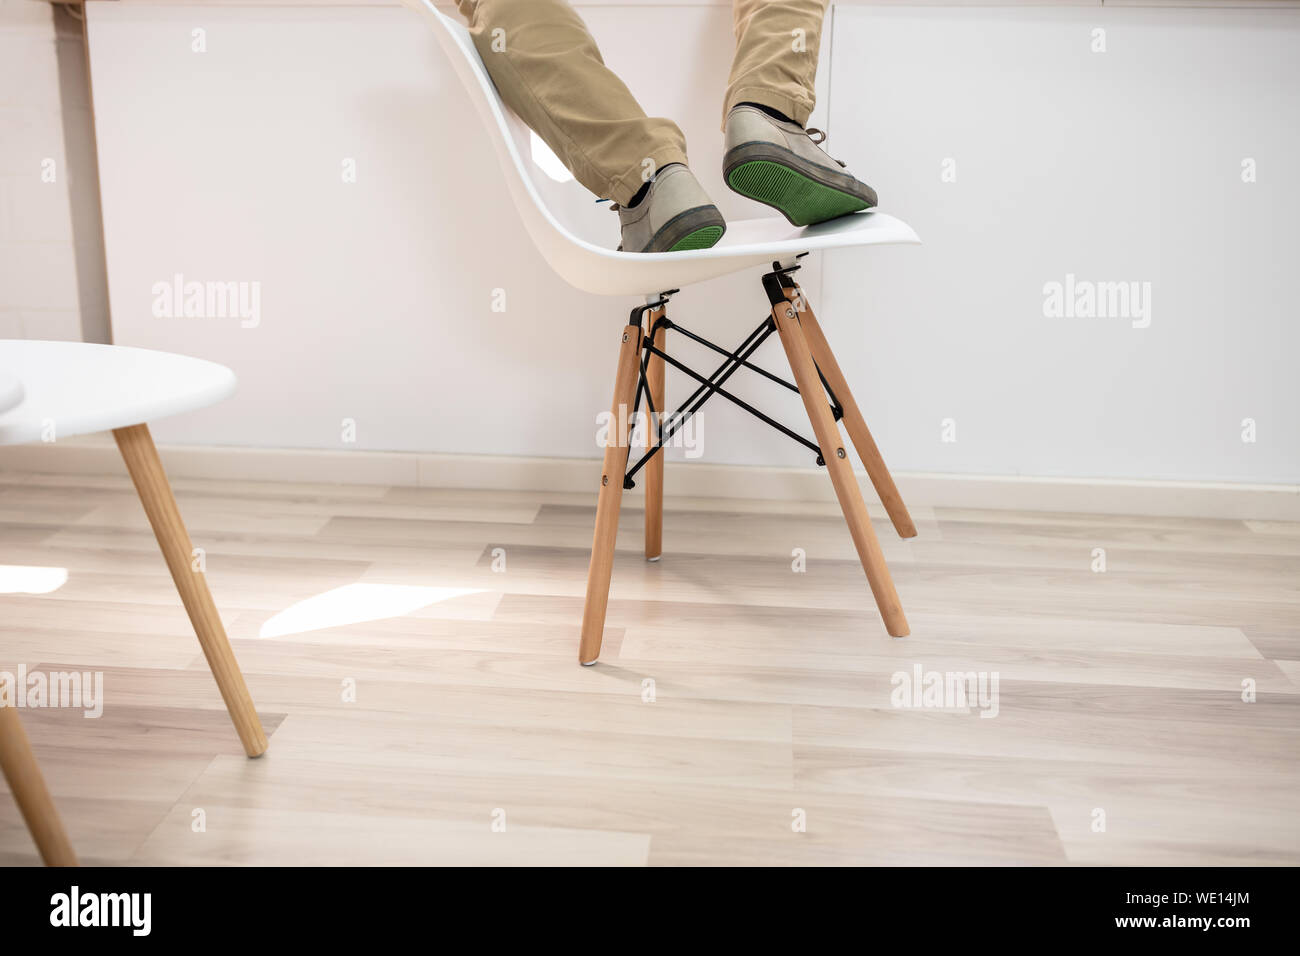 Man Standing On Chair And About To Fall On Floor Stock Photo